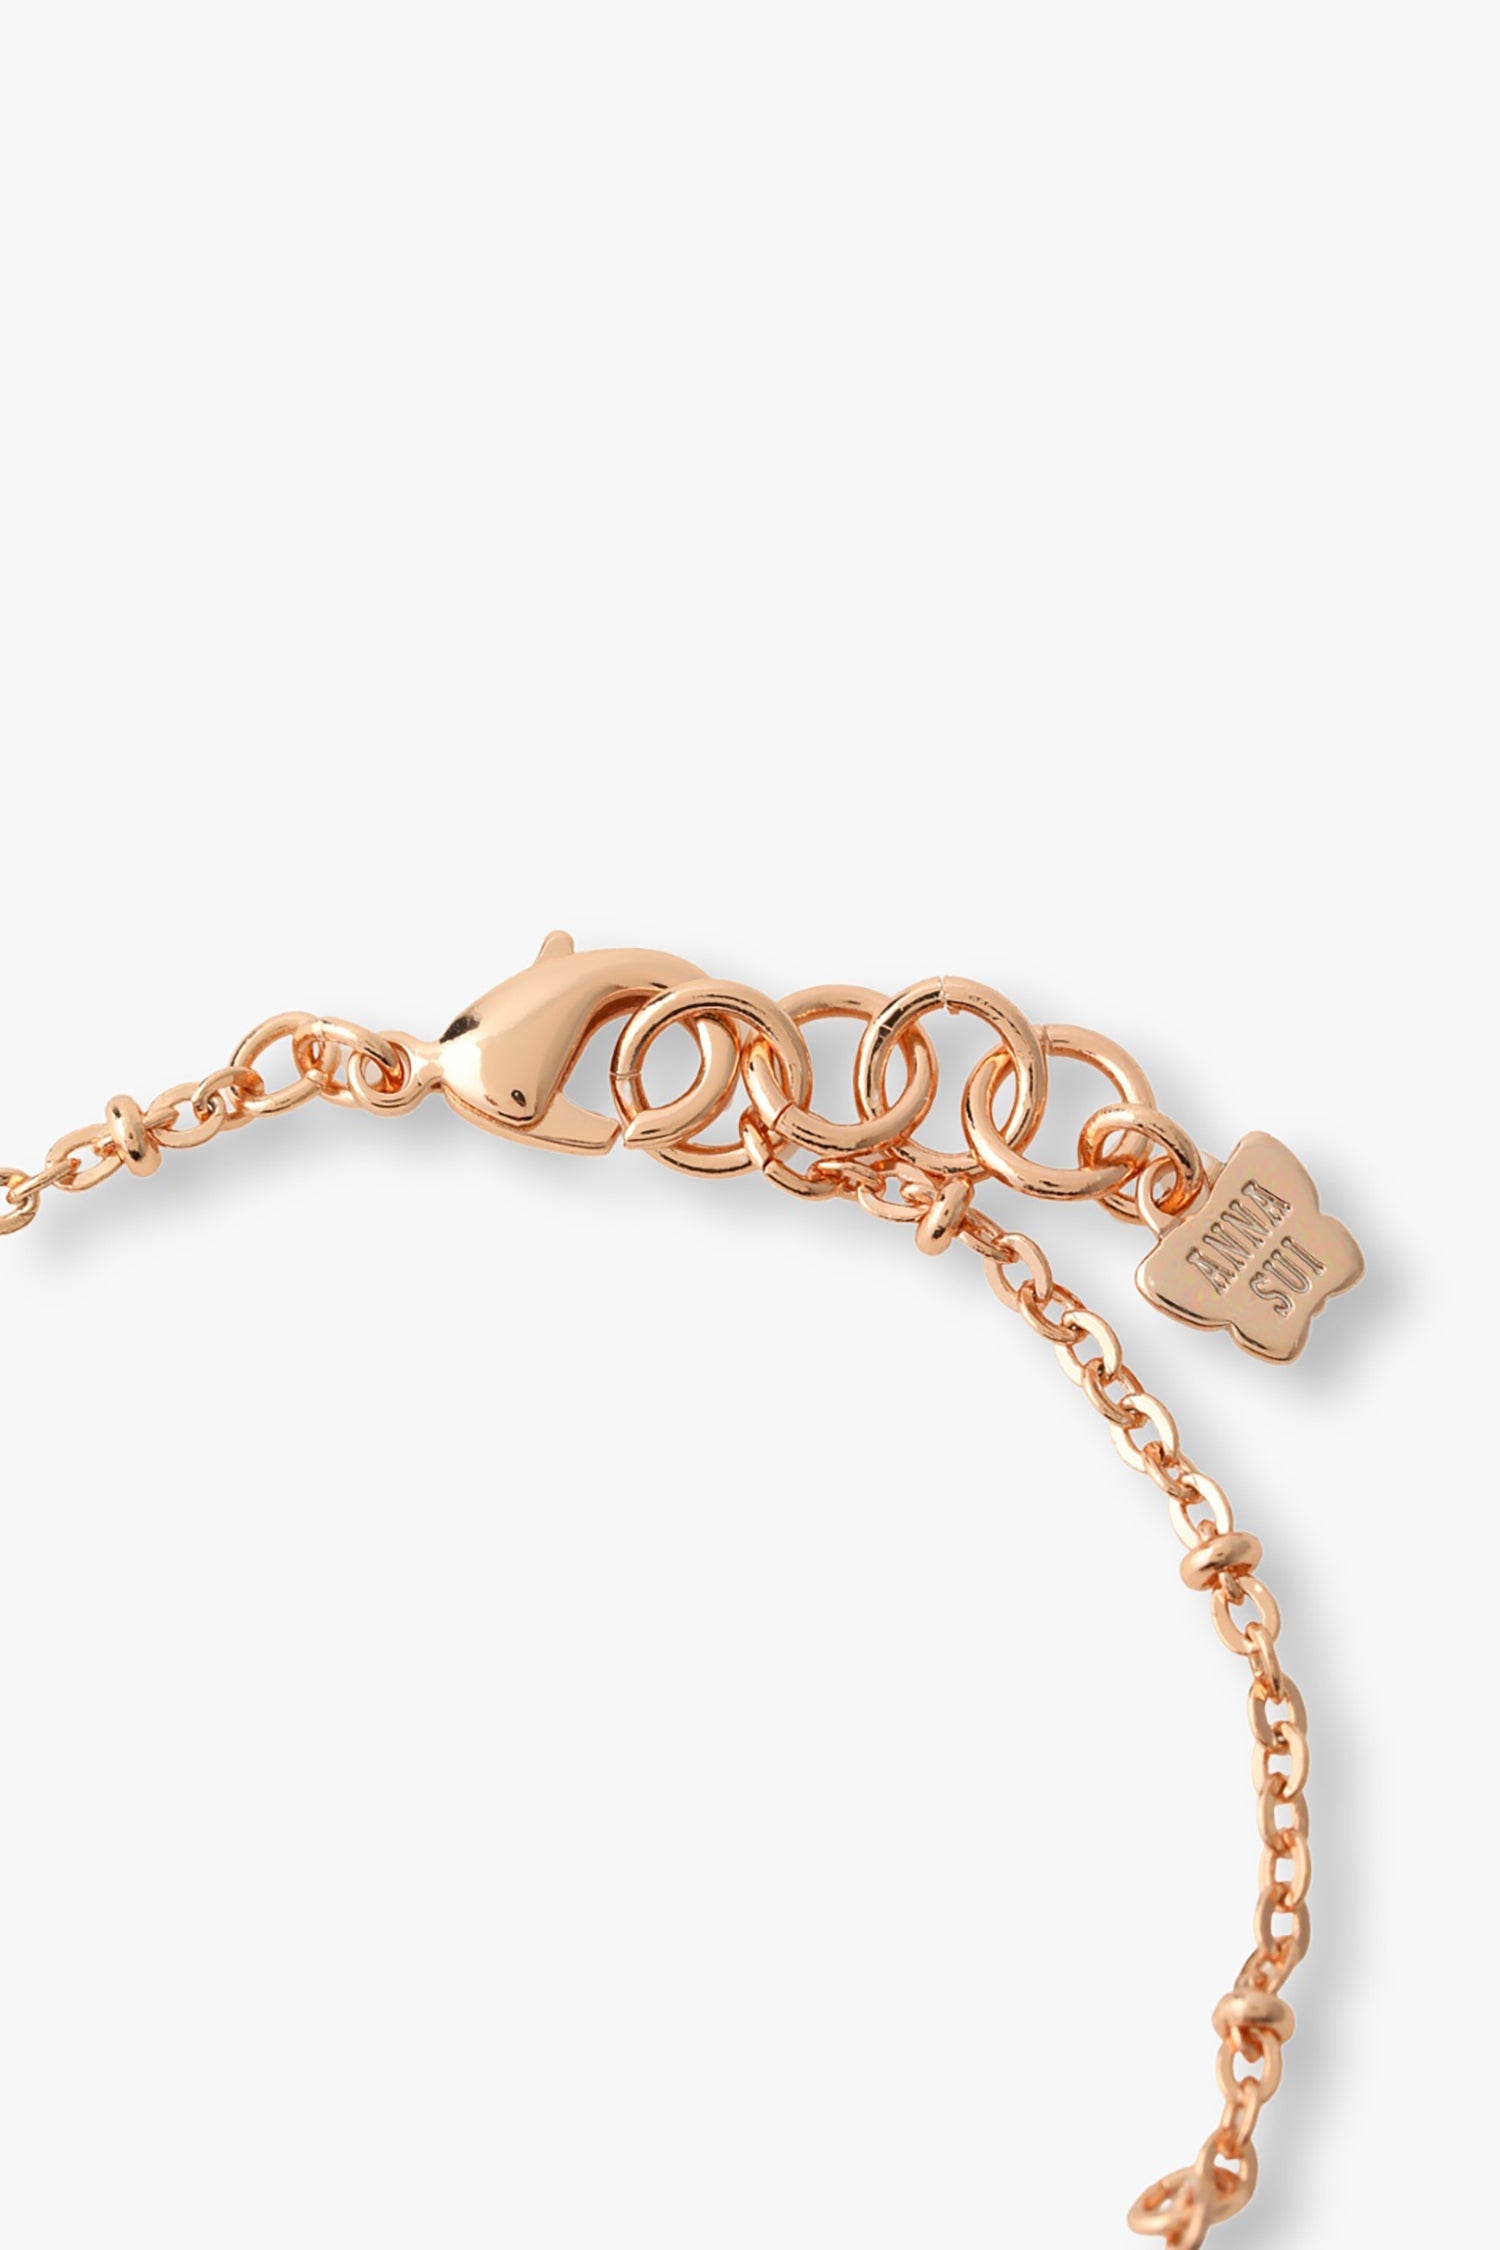 Rose gold lobster claw clasp with large links for adjustability, Anna Sui imprint on a tag